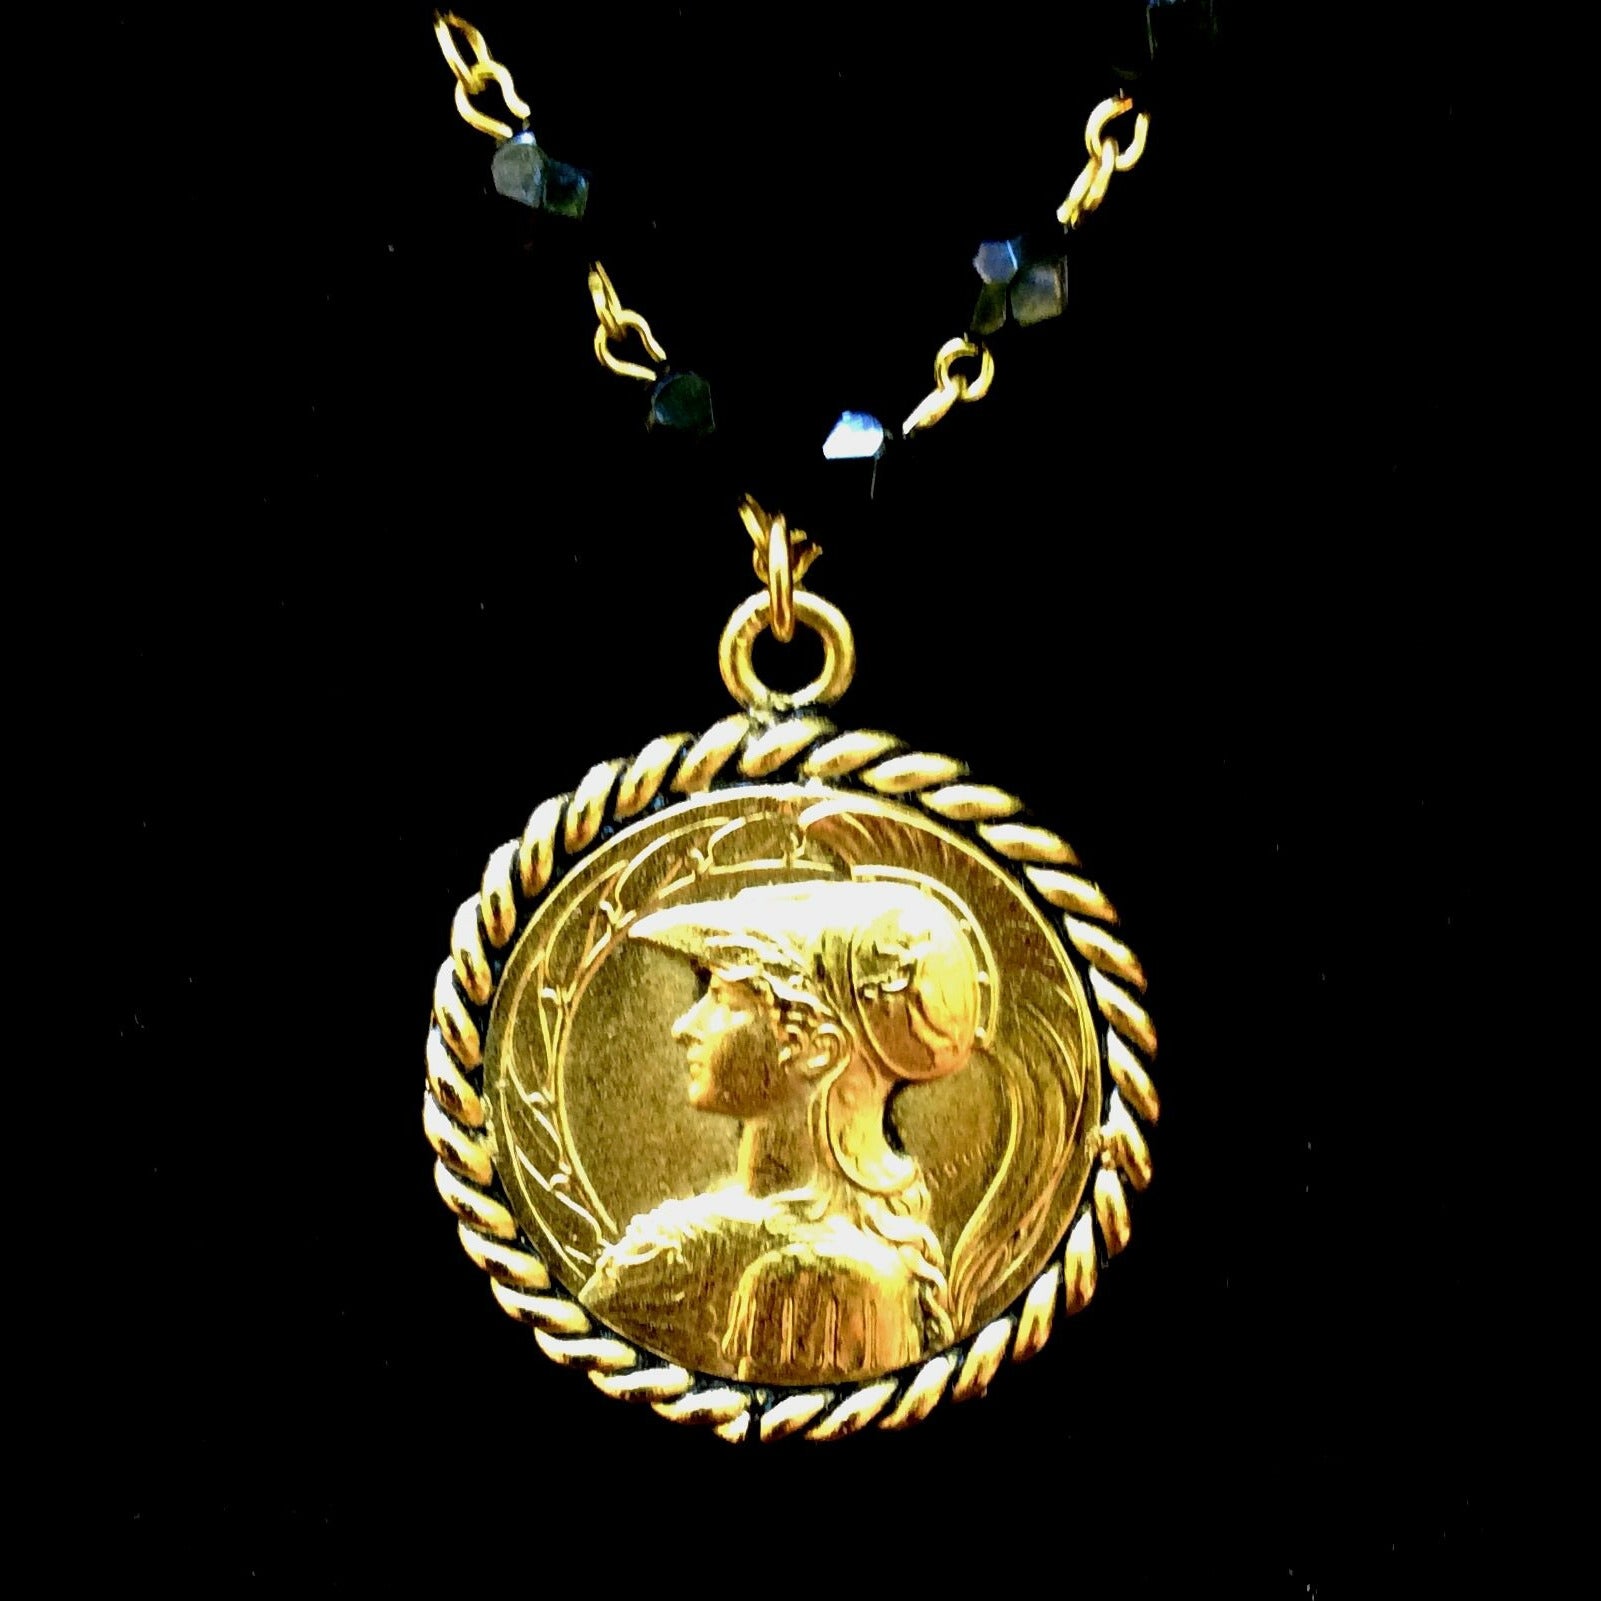 Amazon.com: 14k Real Ancient Greek Coin Pendant Necklace (Athena; 200-133  B.C.) - 14k Gold Chain Necklace by Miller Mae Designs (Pendant & 14k Chain)  (Pendant Only) : Handmade Products